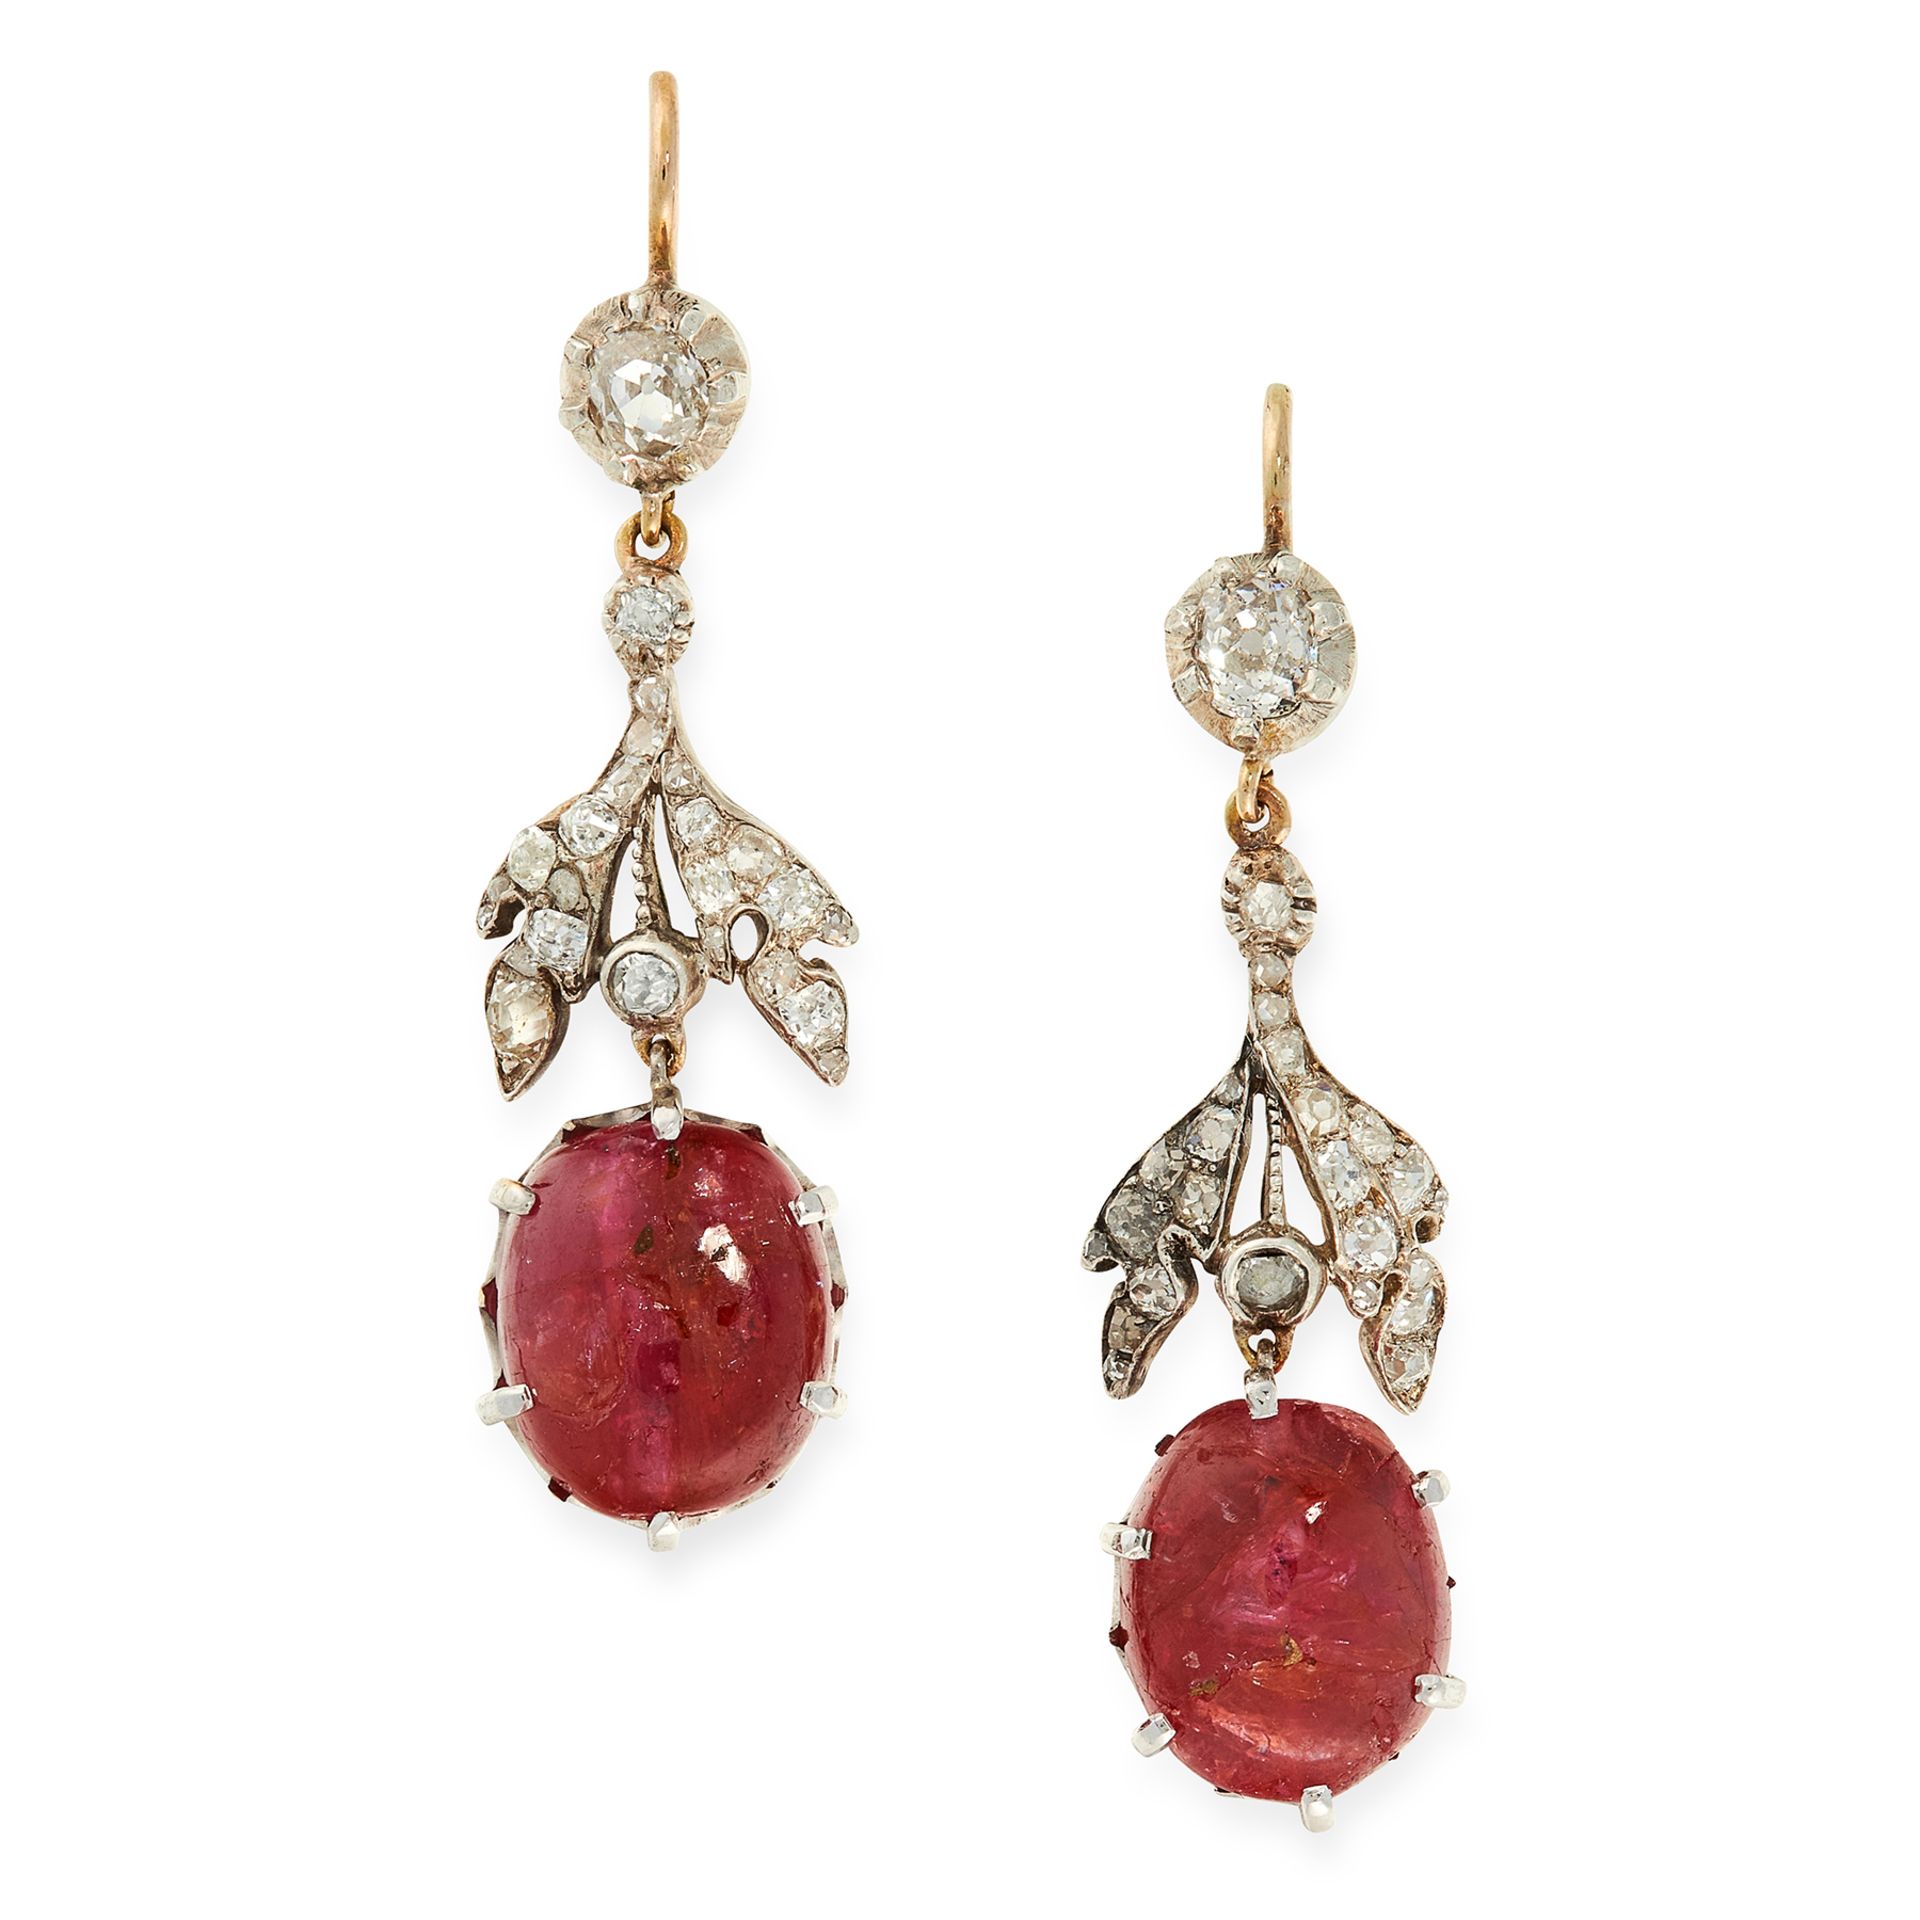 A PAIR OF BURMA NO HEAT RUBY AND DIAMOND DROP EARRINGS in yellow gold and silver, each set with a